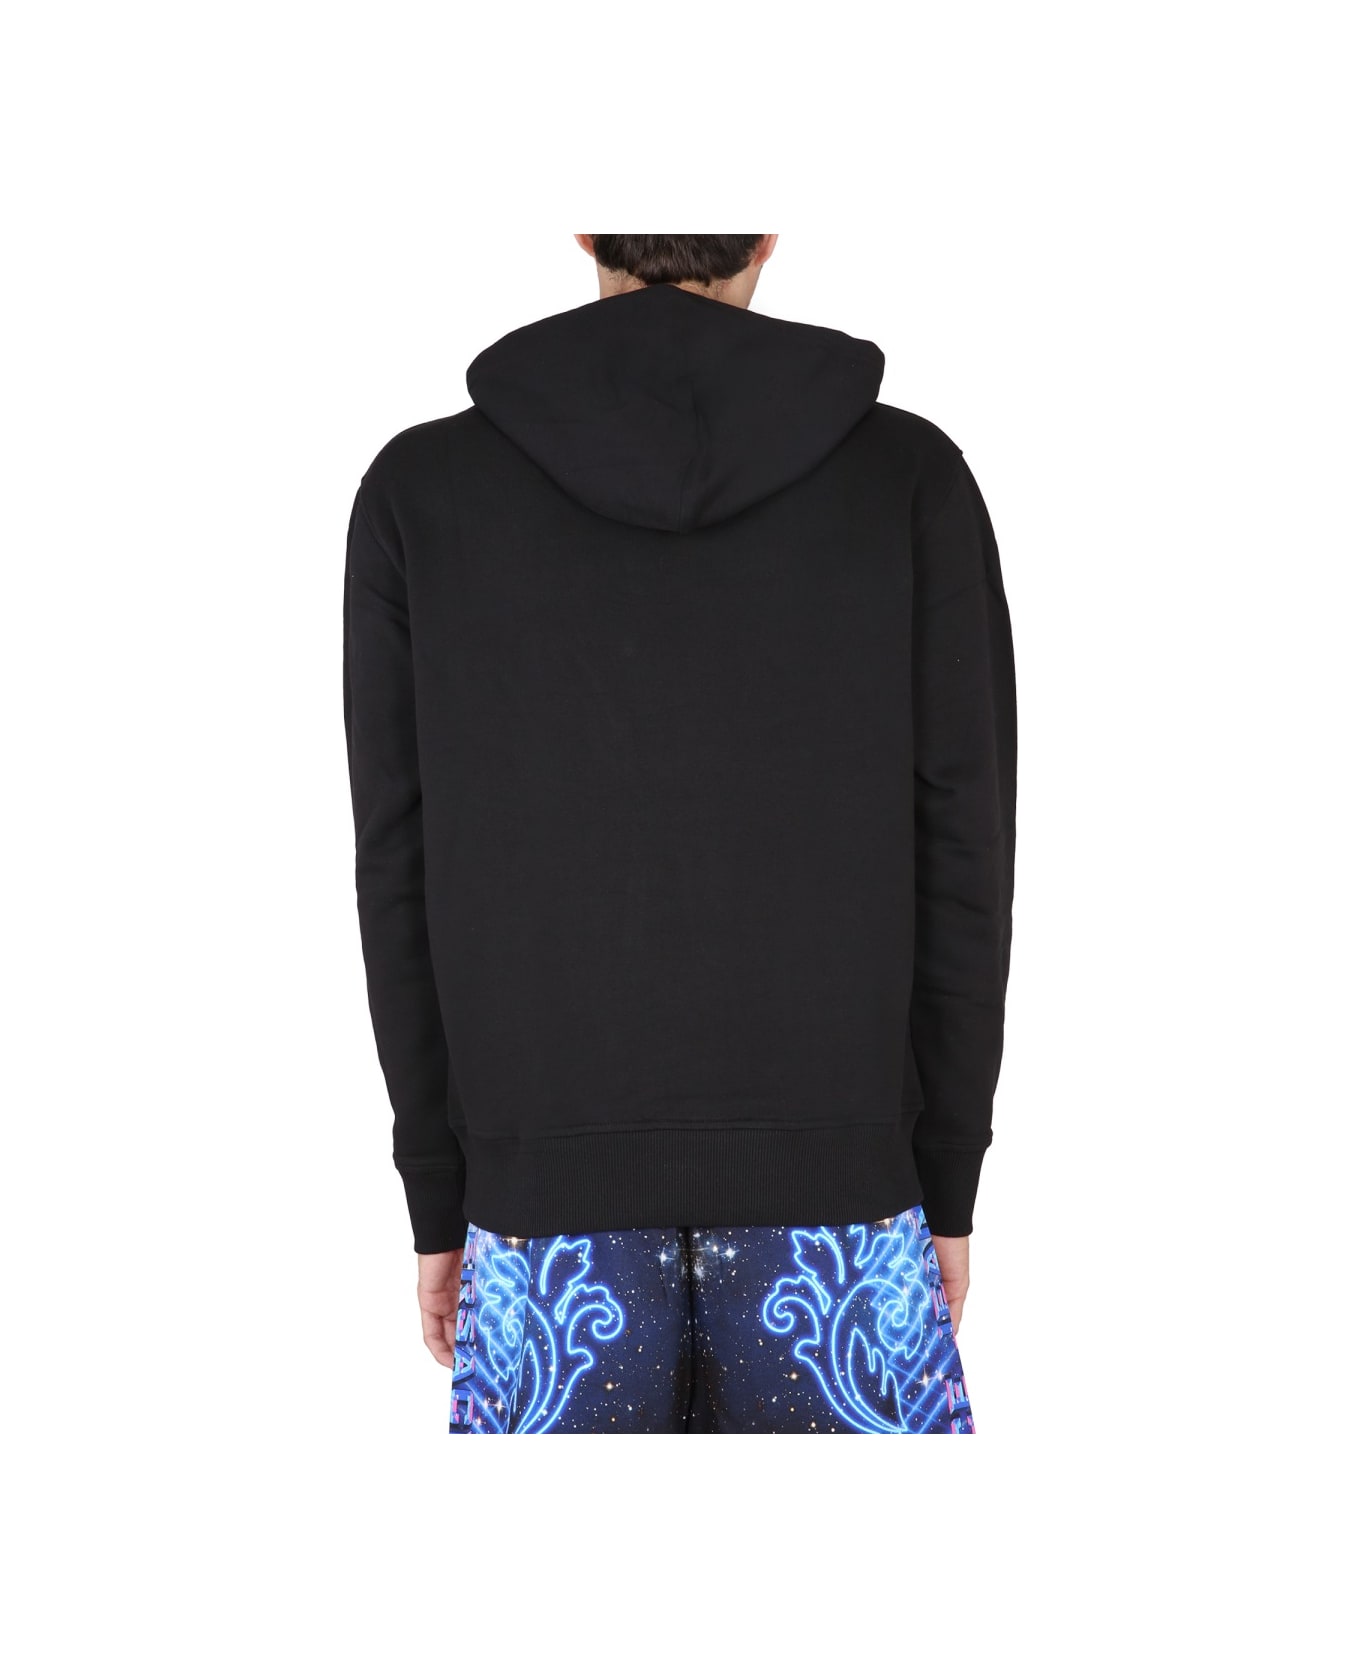 Versace Jeans Couture "space Warranty" Hoodie - BLACK